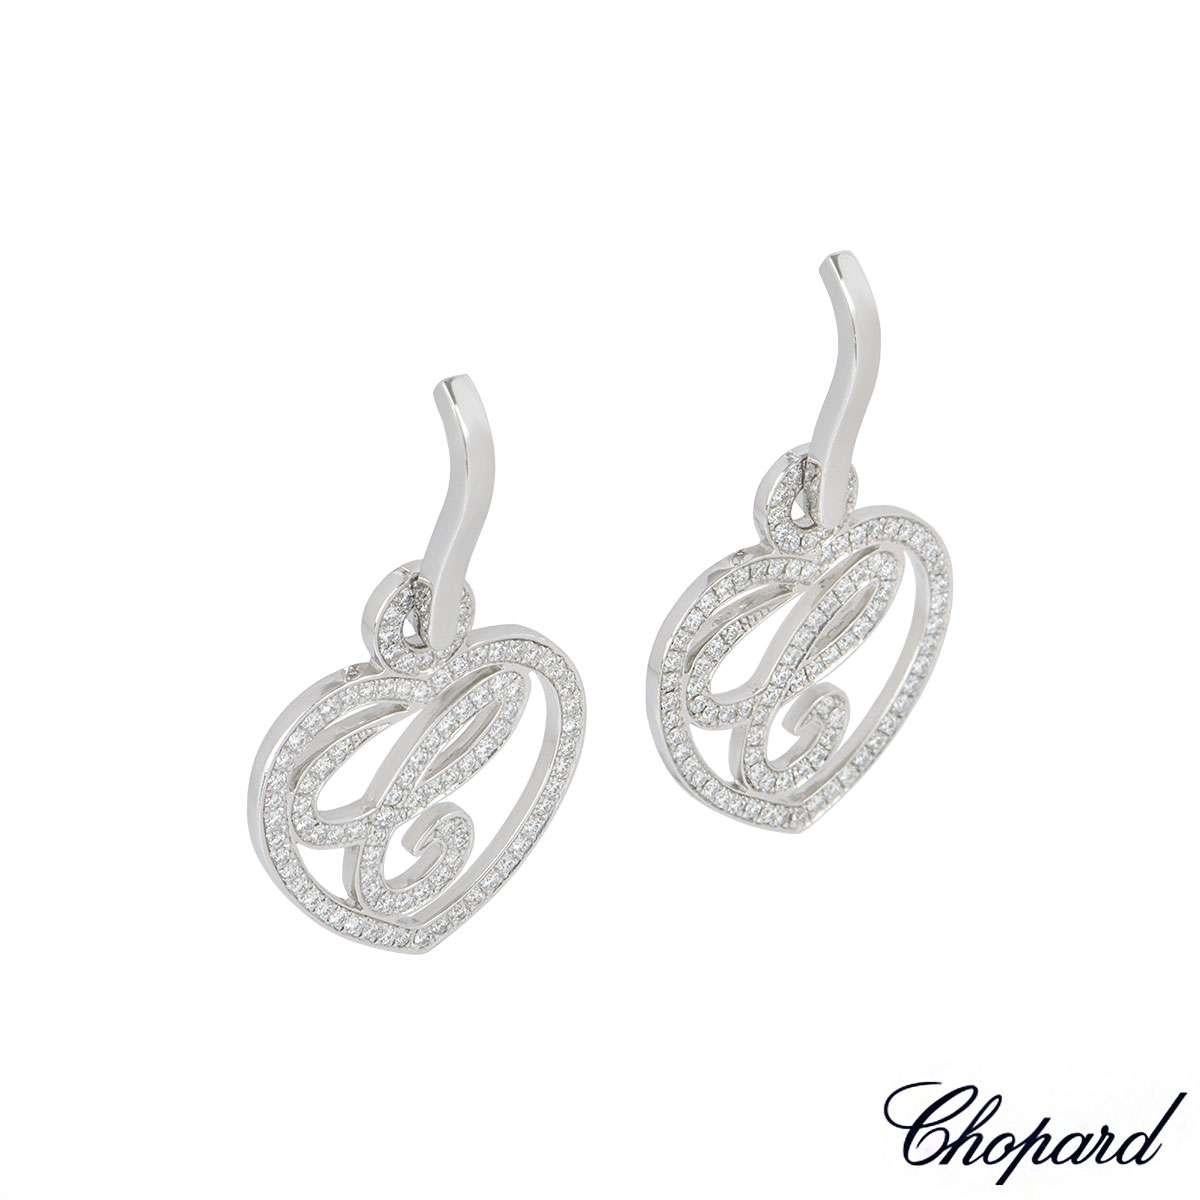 A paid of 18k white gold earrings from the Happy Diamonds collection by Chopard. The earrings feature a diamond set openwork heart with a C in the centre. The earrings have a total of 188 round brilliant cut diamonds totalling 0.46ct, F-G colour and